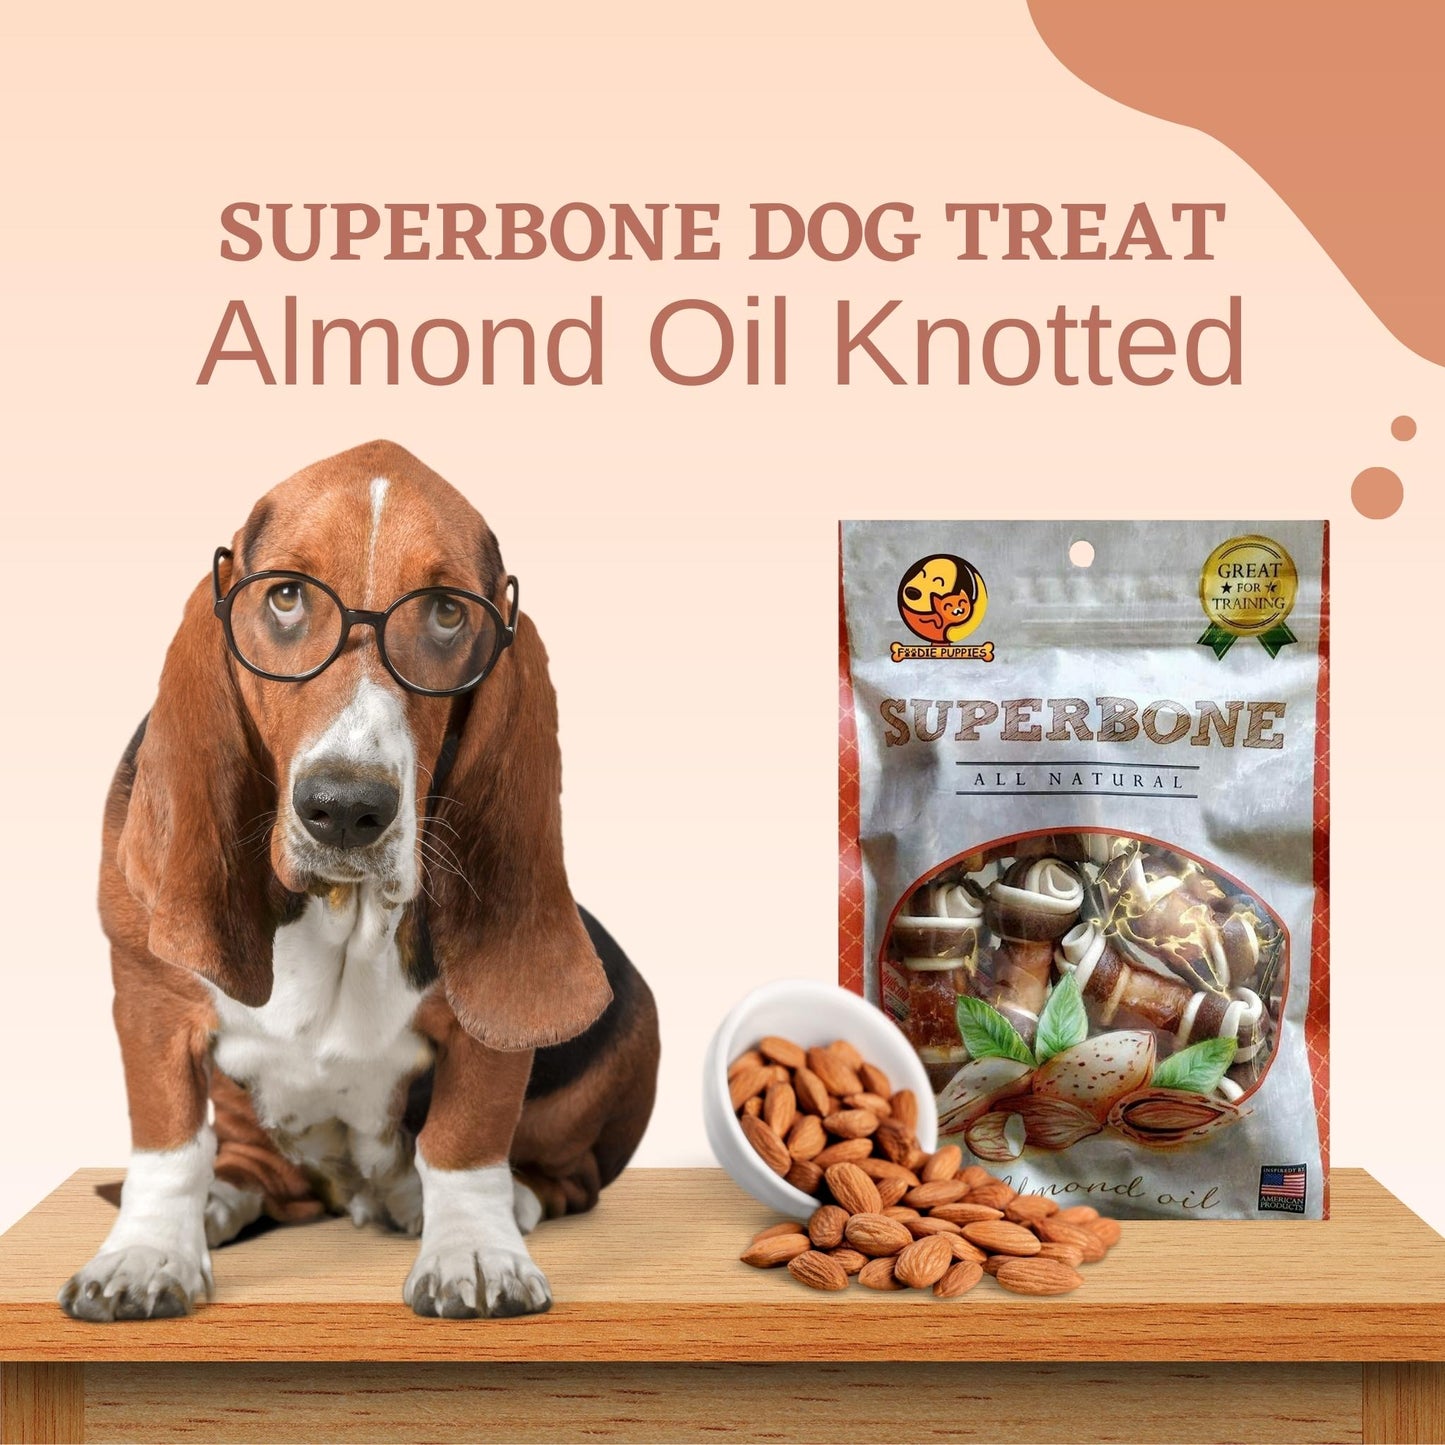 SuperBone All Natural Almond Oil Knotted Dog Treat - Pack of 2